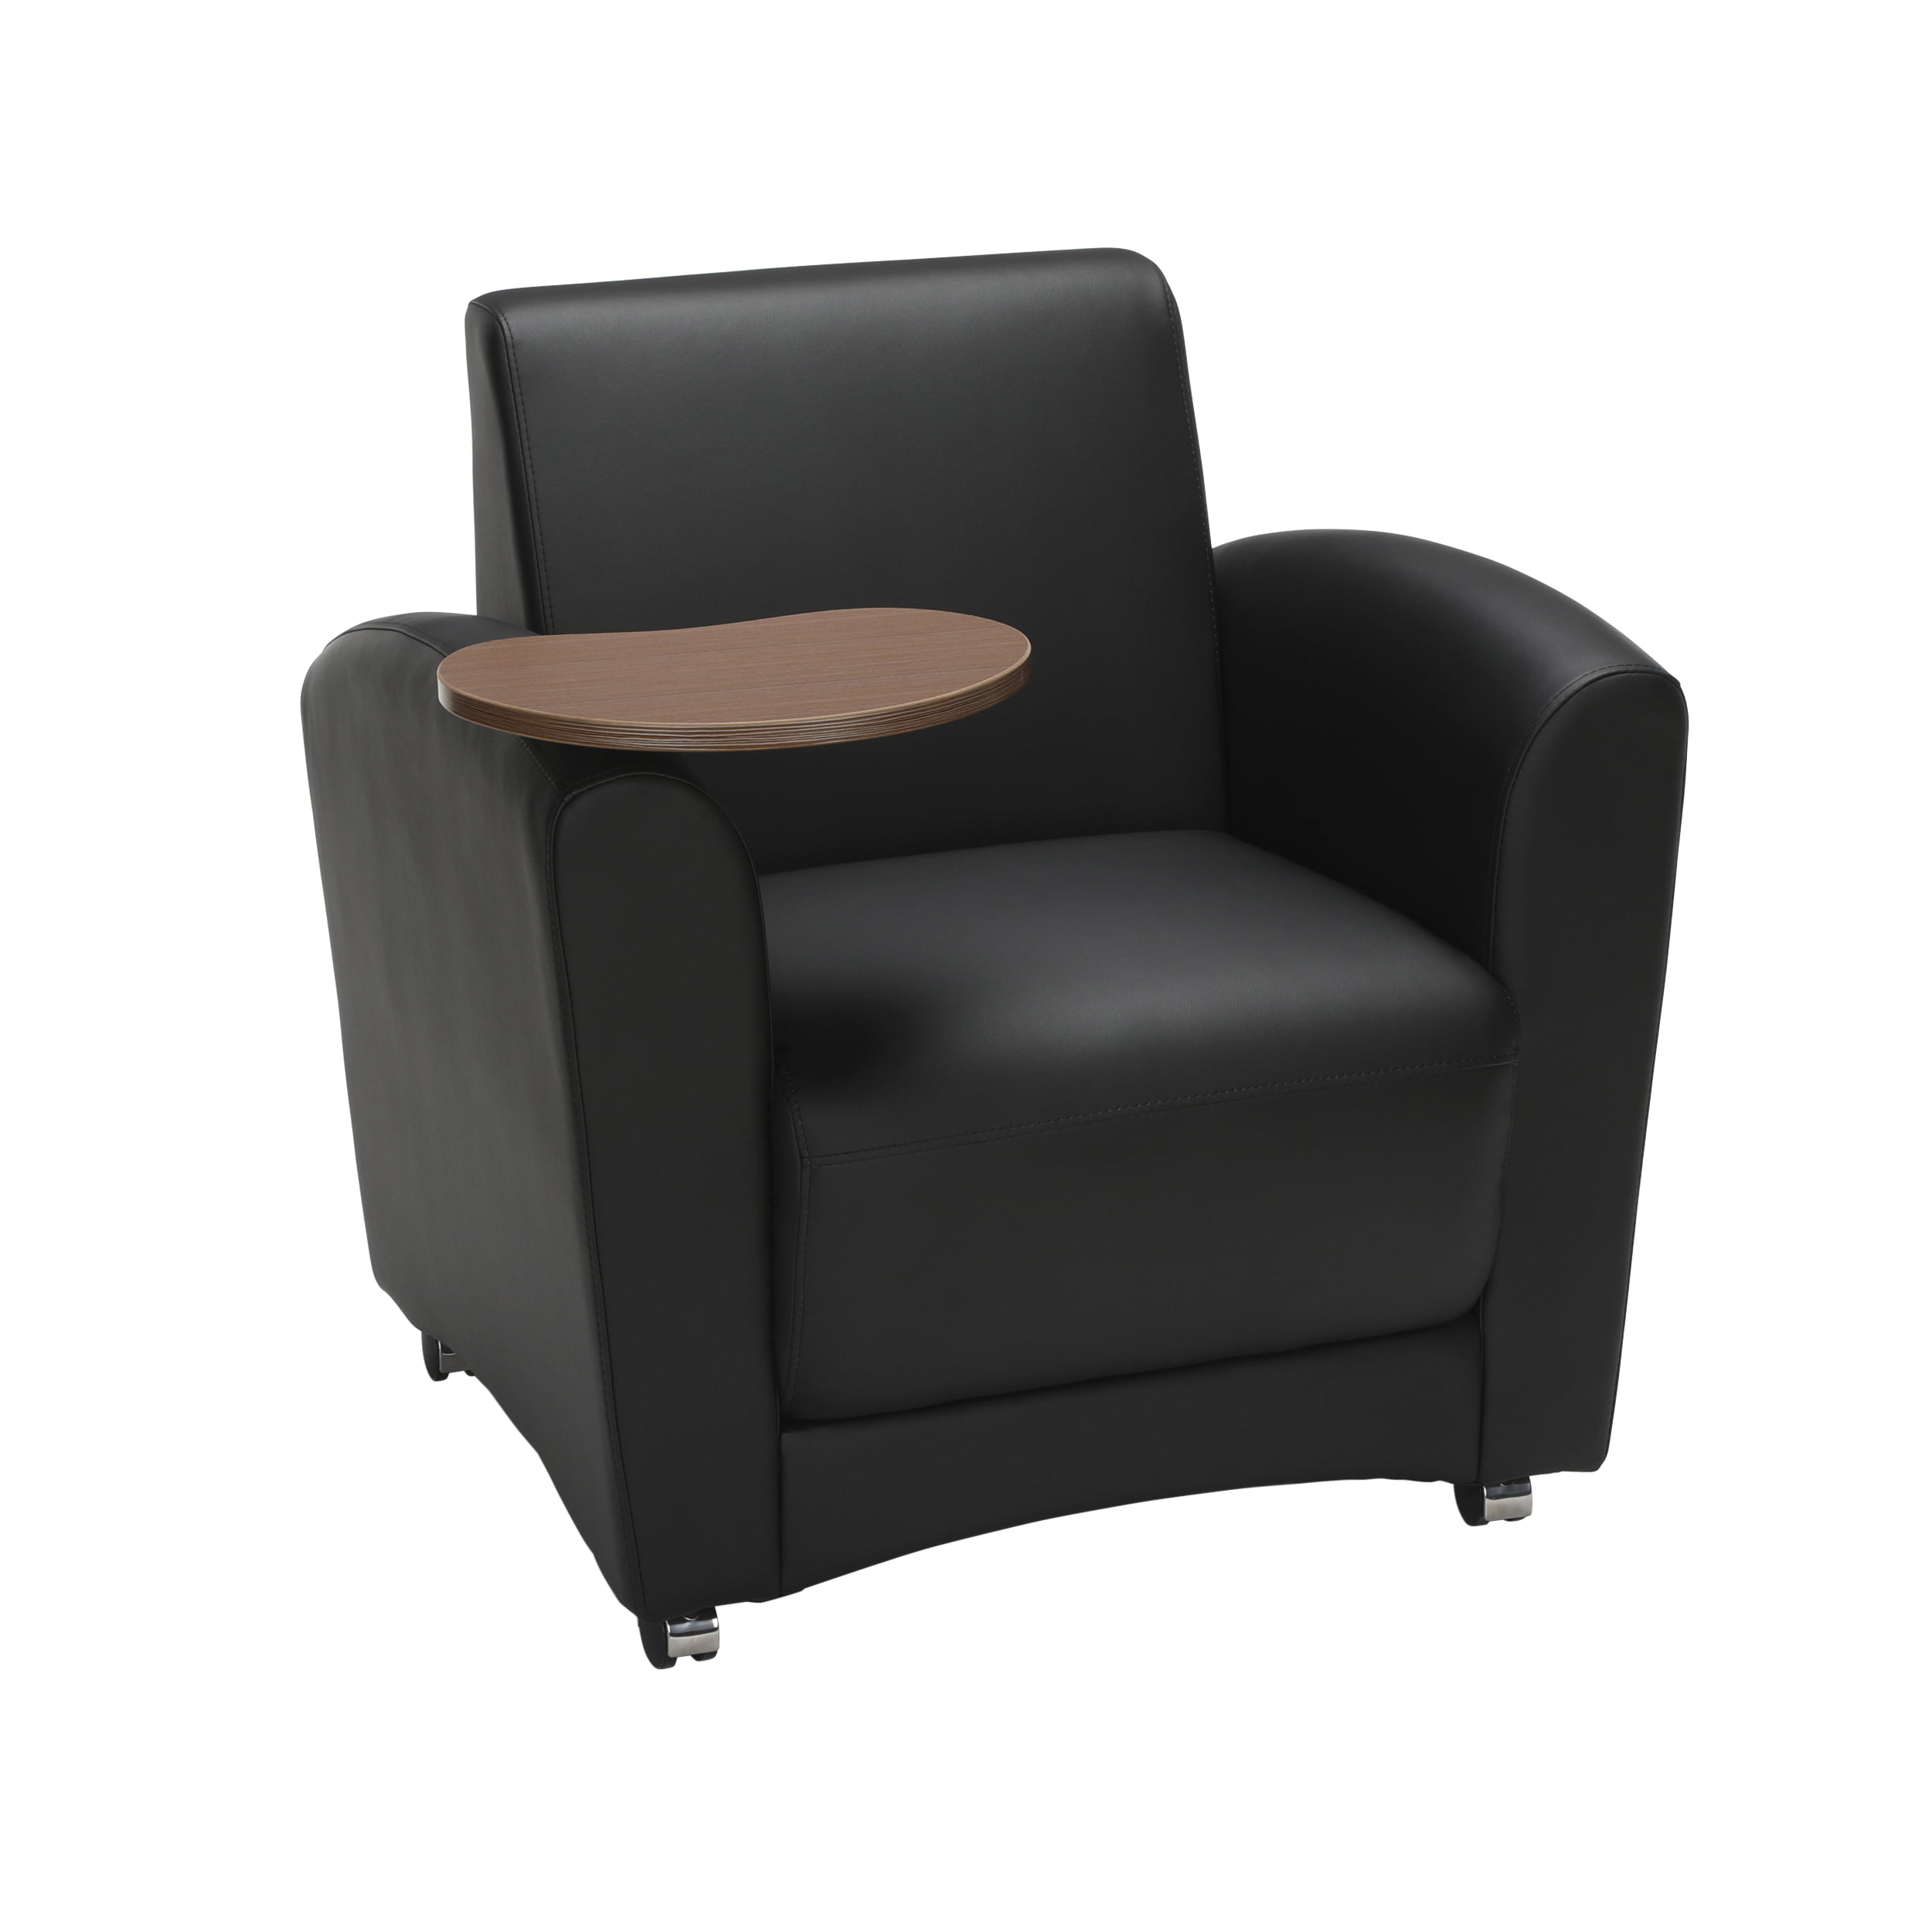 OFM Social Seating Guest Reception Waiting Room Chair with Single